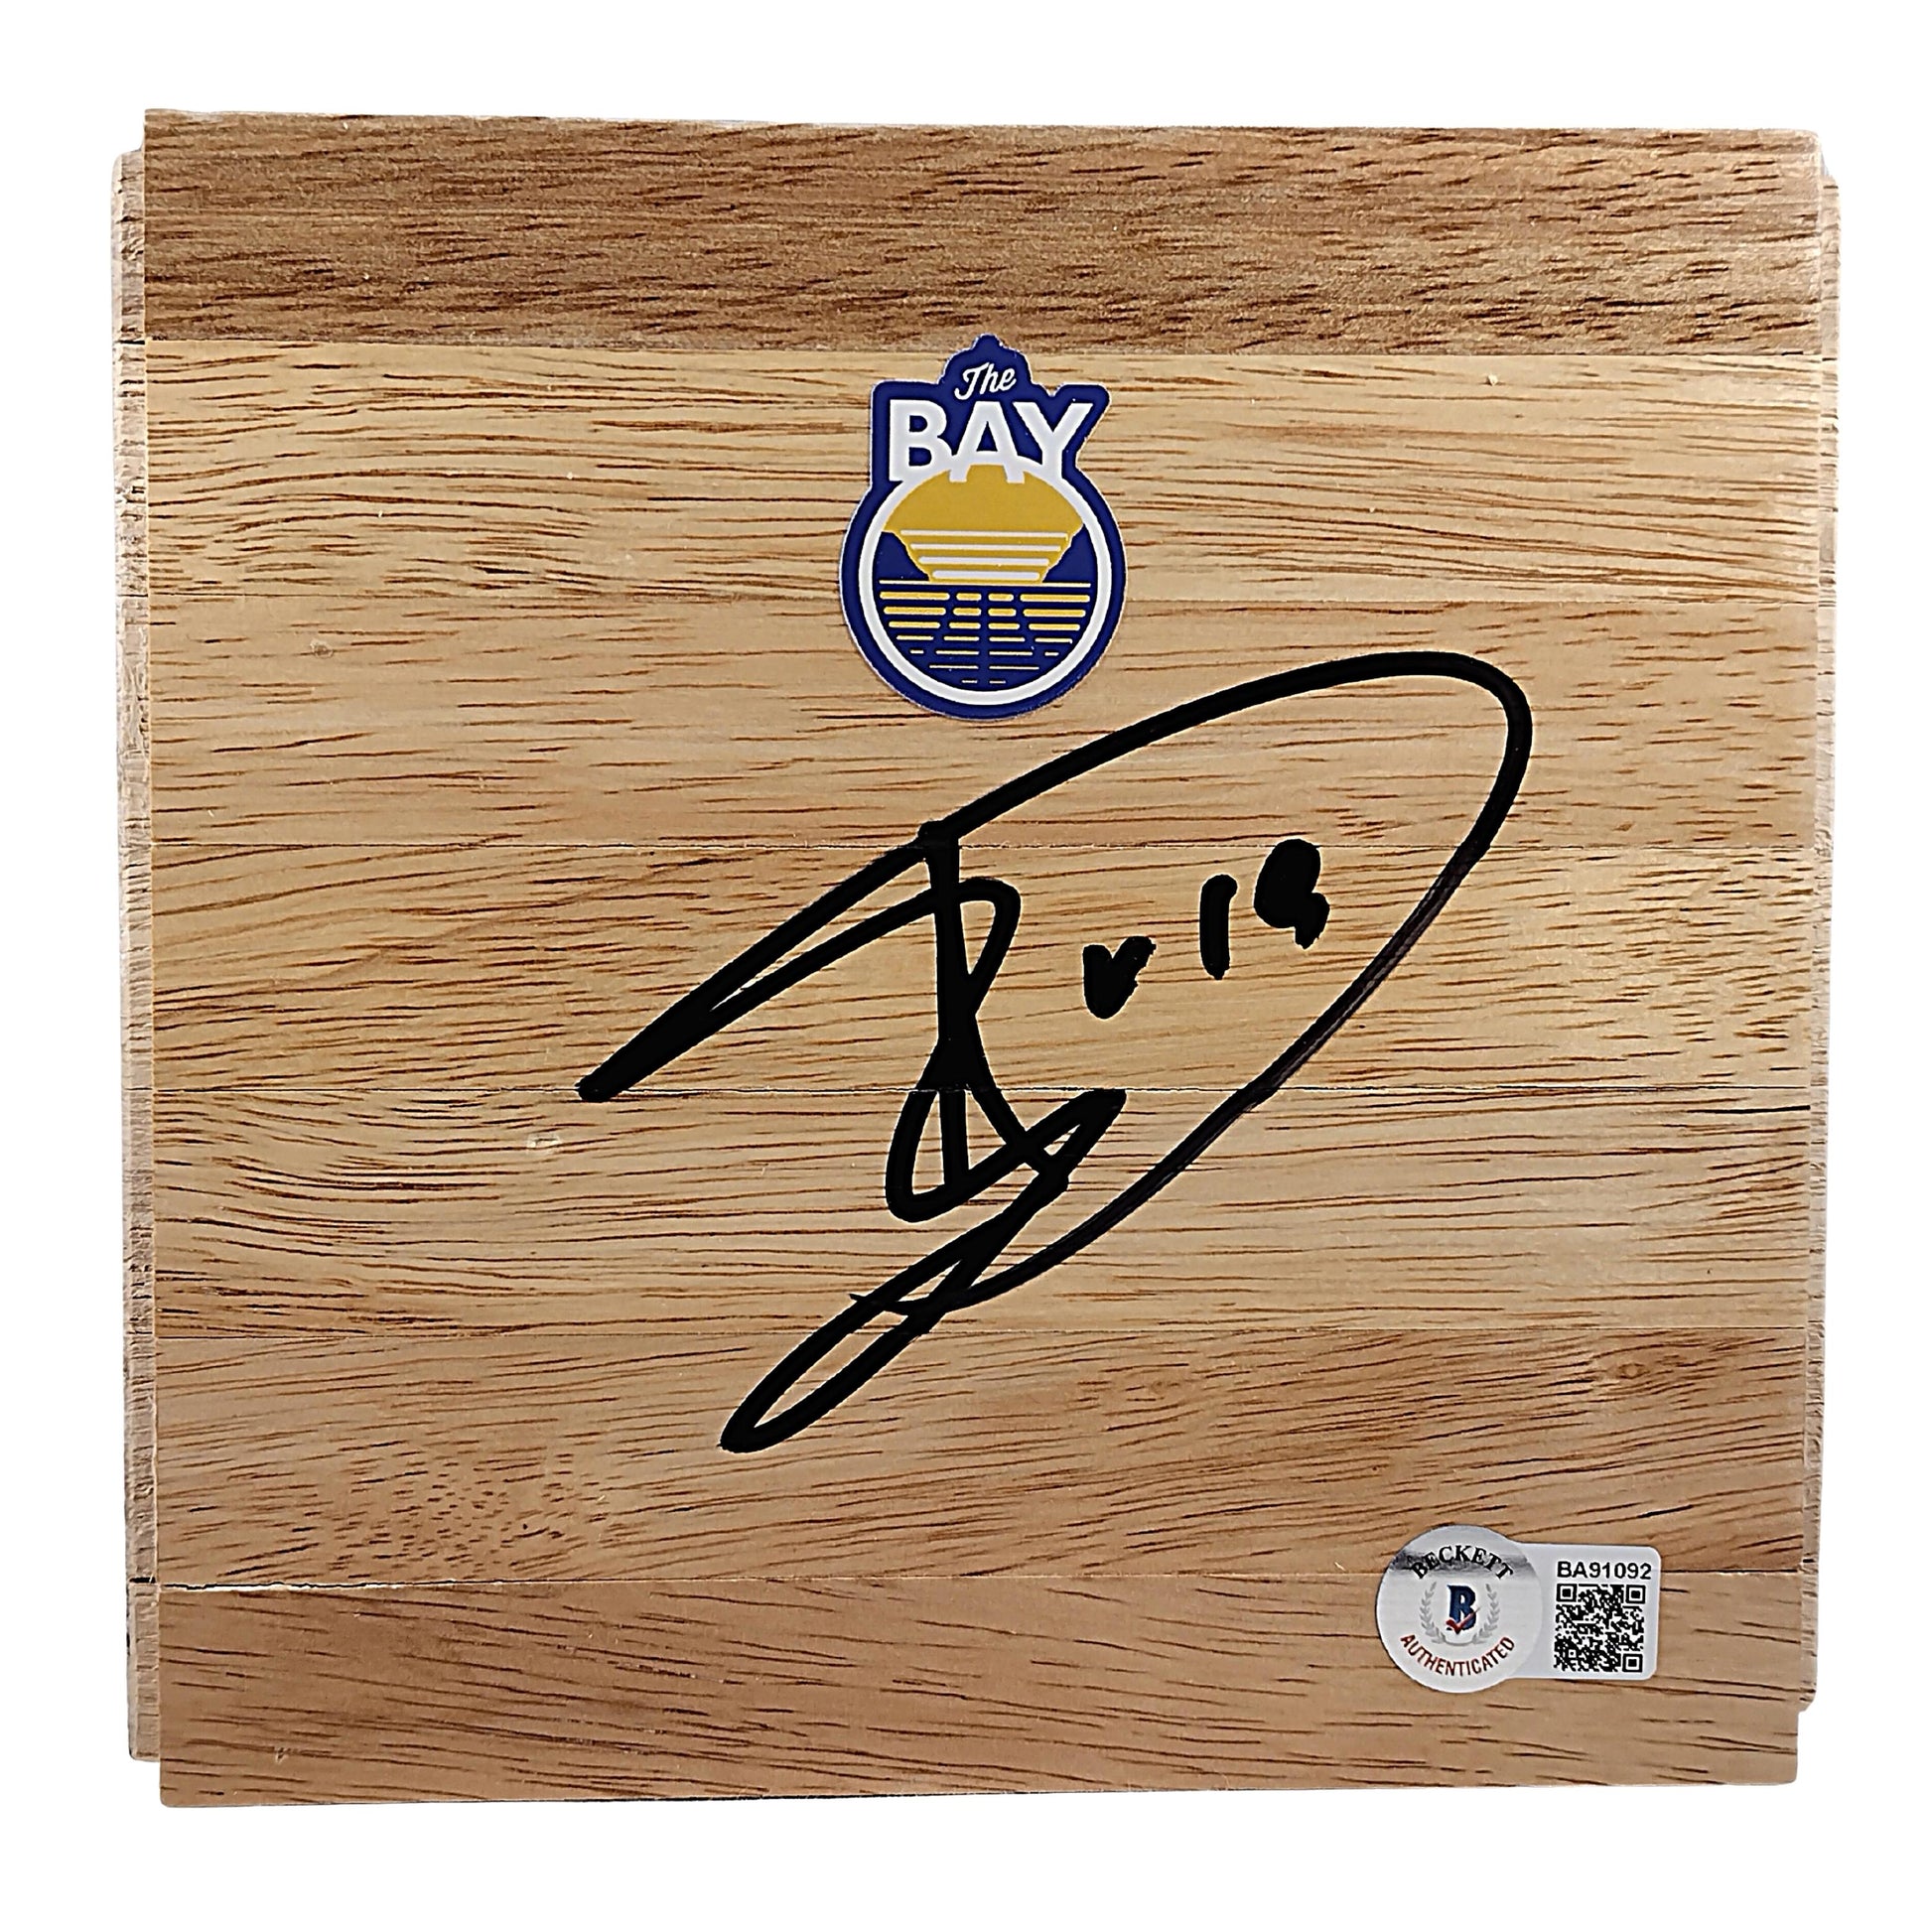 Basketballs- Autographed- Leandro Barbosa Signed Golden State Warriors Parquet Basketball Floorboard Exact Proof Photo Beckett Authentication 102